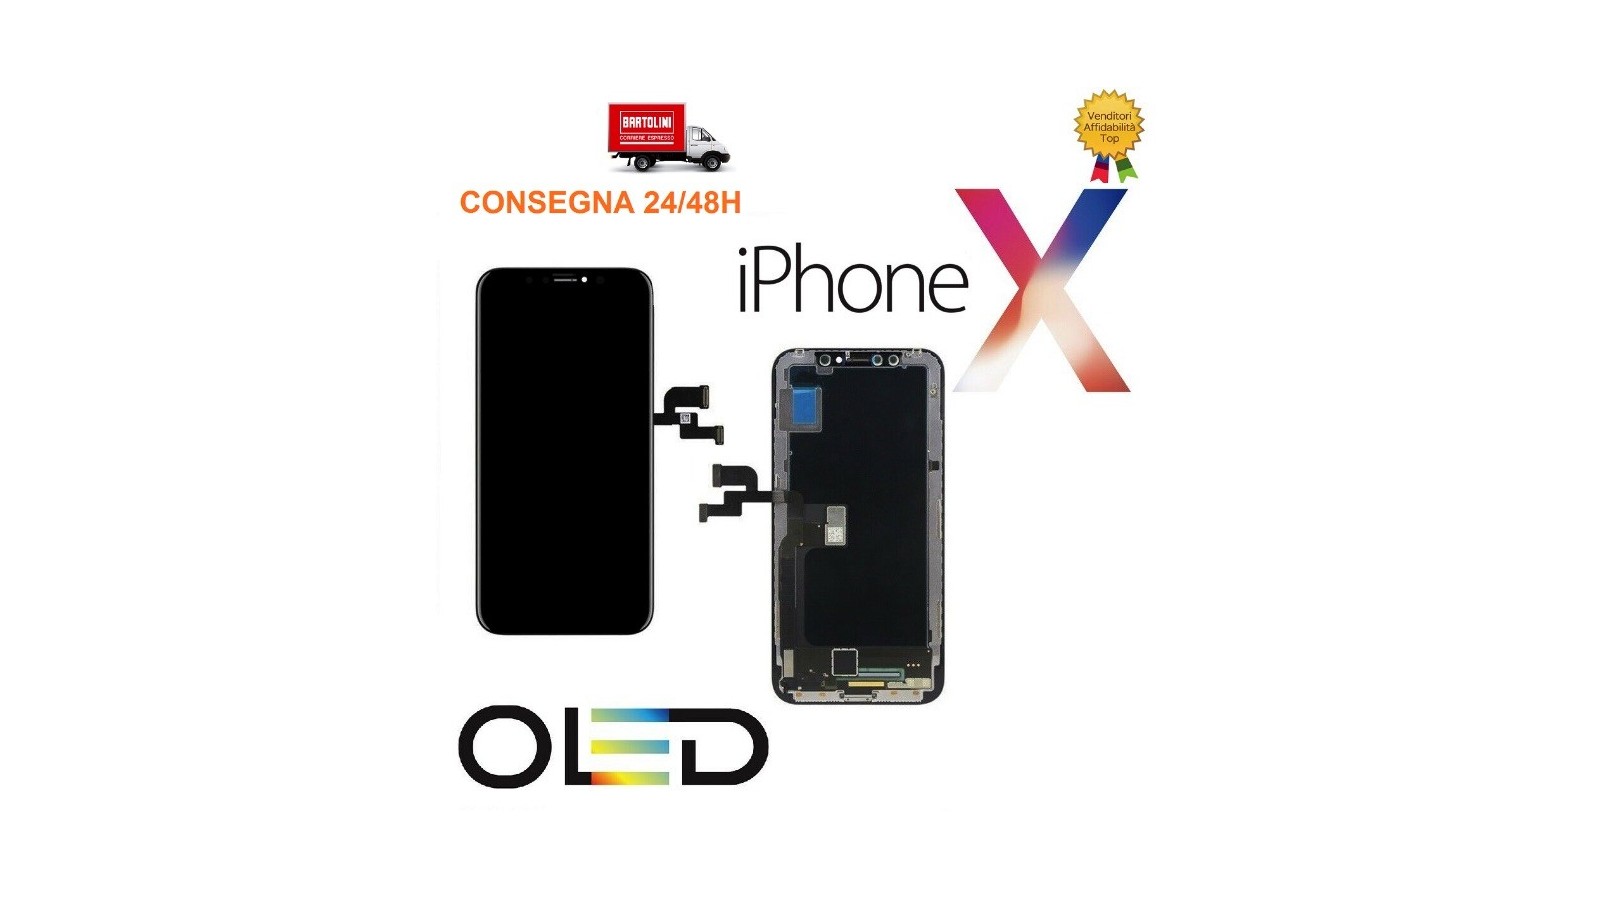 Display Lcd OLED per Apple Iphone X completo di Touch screen 3D 